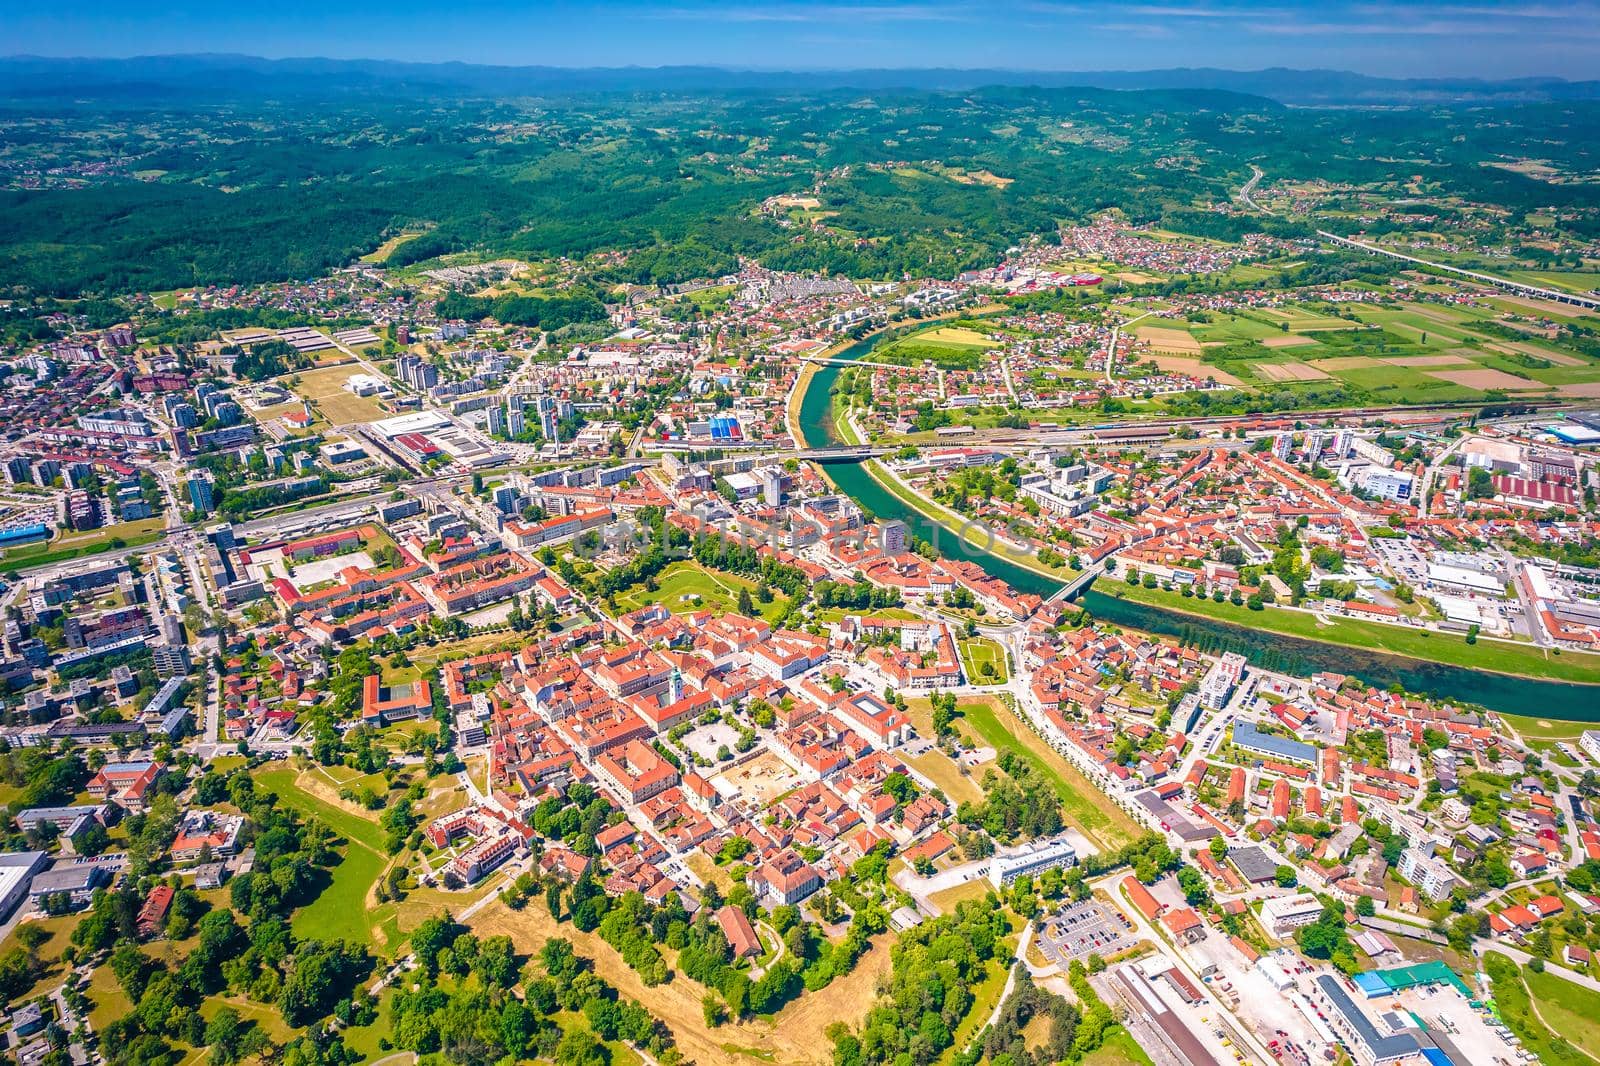 Town of Karlovac on four rivers aerial panoramic view by xbrchx